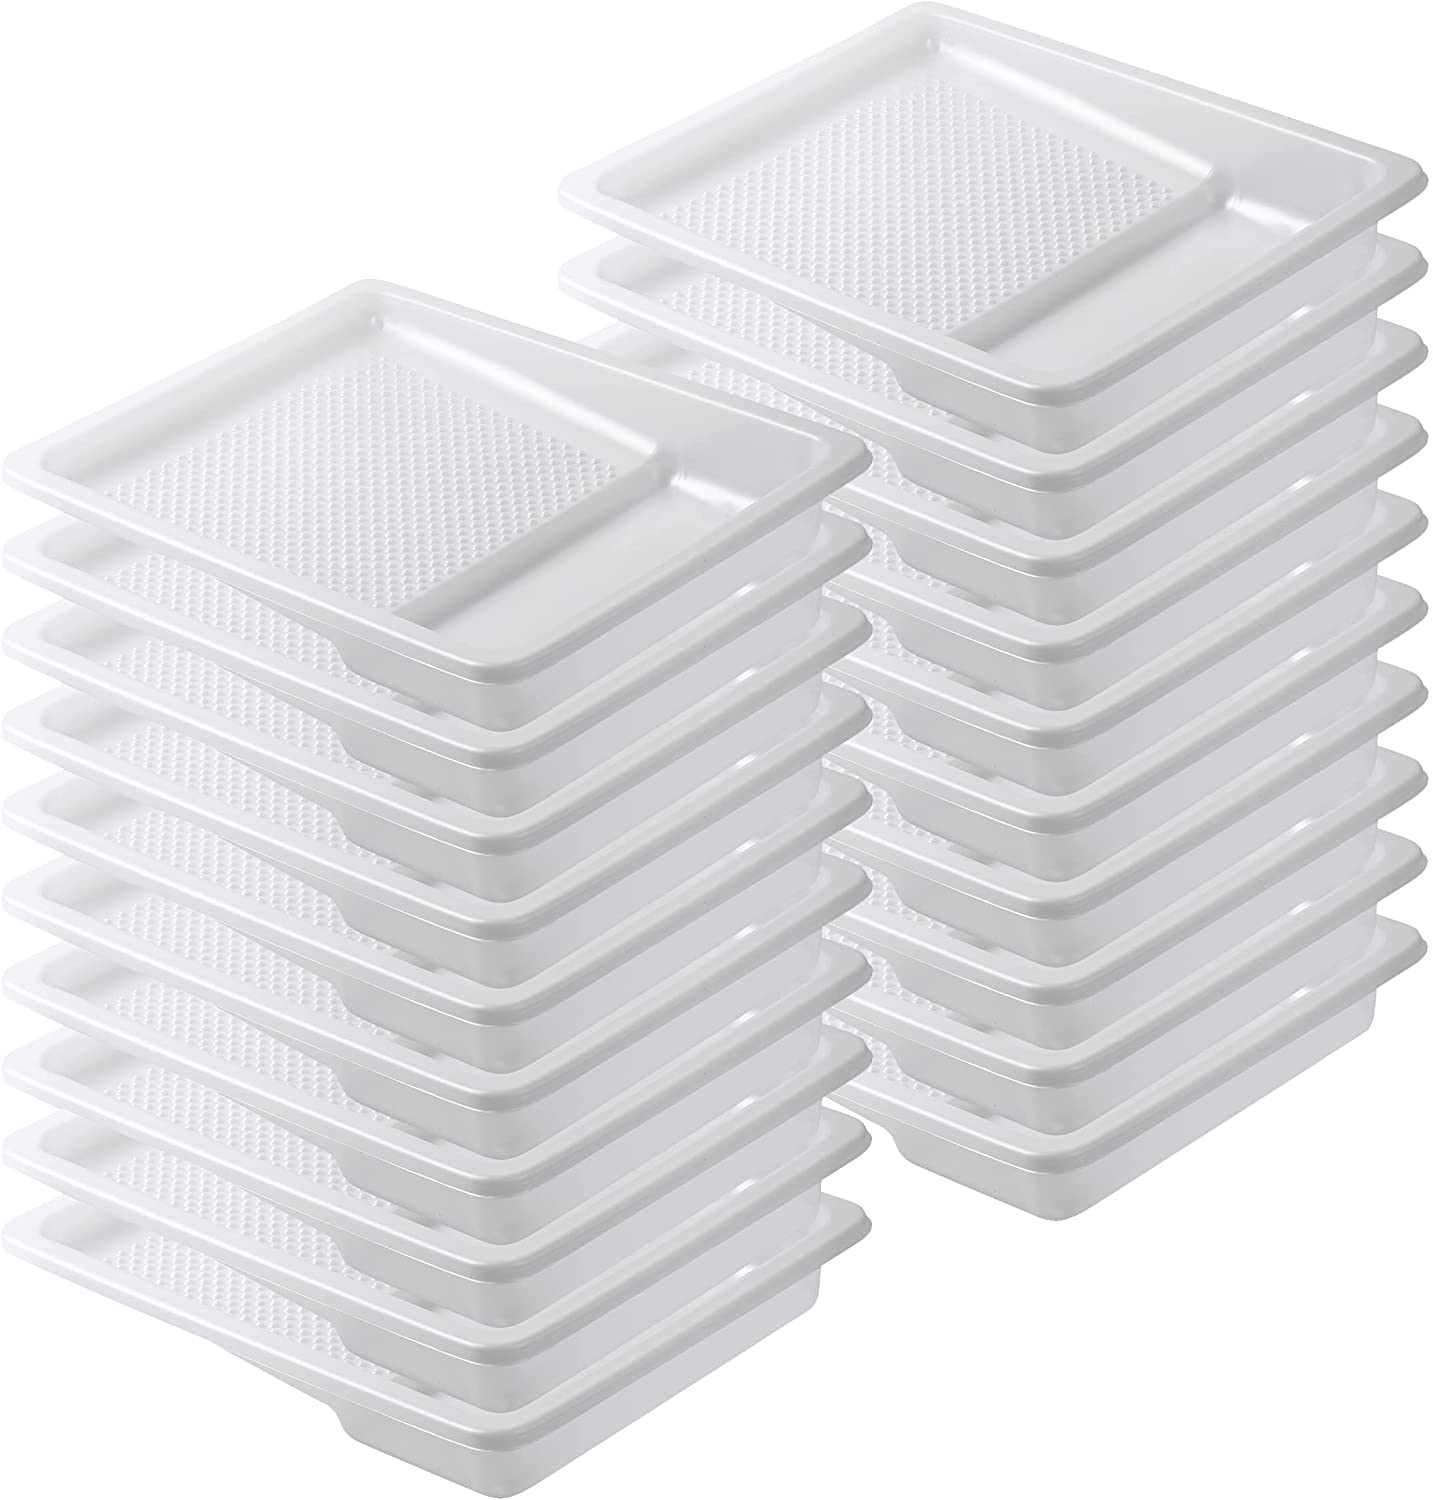 Bates- Paint Tray Liner, 9 Inch, 20 Pack, Paint Pans Trays, Plastic Paint  Tray, Disposable Paint Tray, Paint Roller Tray - Bates Choice